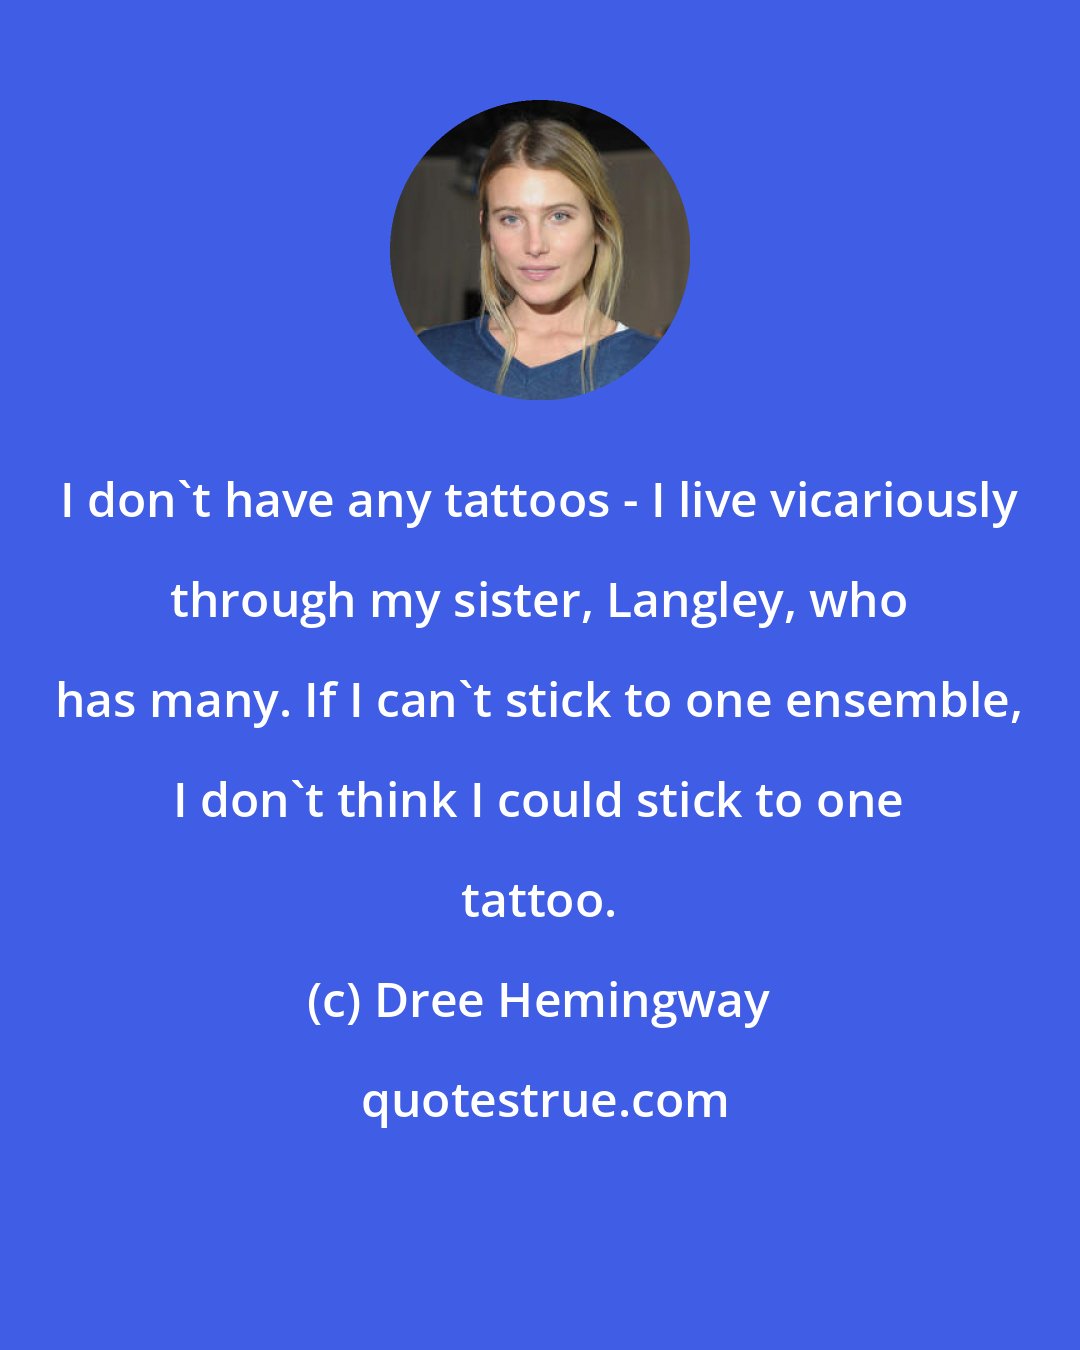 Dree Hemingway: I don't have any tattoos - I live vicariously through my sister, Langley, who has many. If I can't stick to one ensemble, I don't think I could stick to one tattoo.